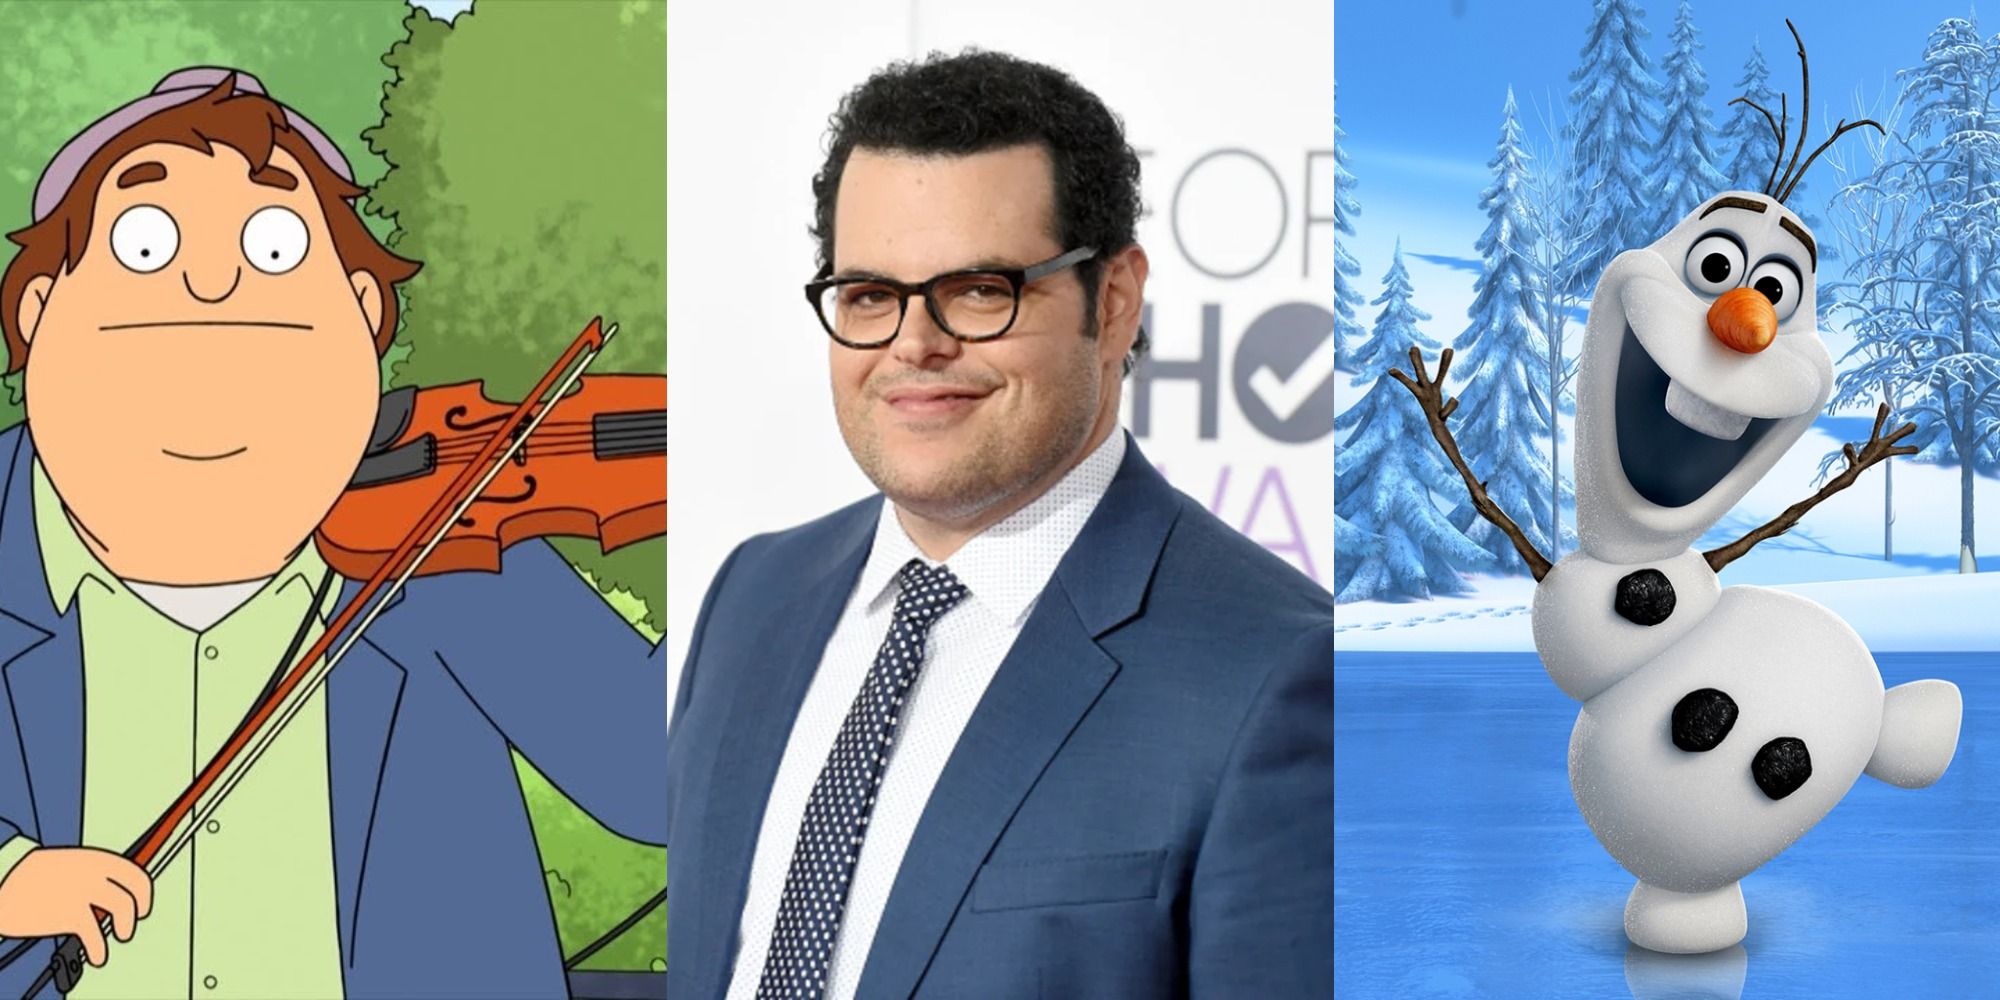 Split image of Birdie from Central Park, Josh Gad, and Olaf in Frozen